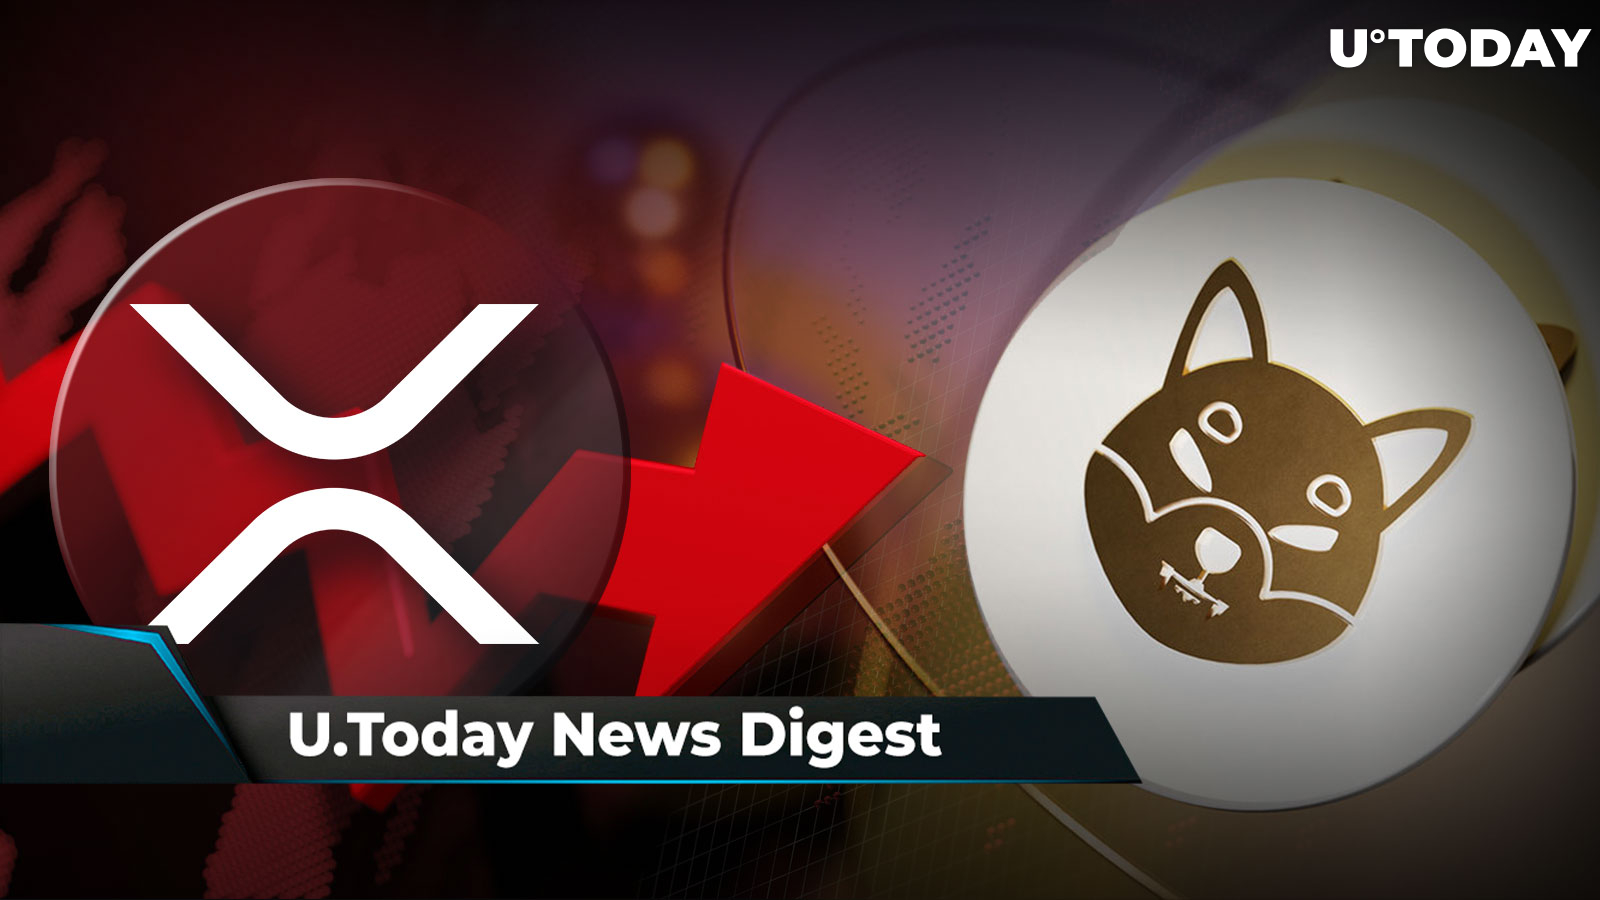 XRP Suddenly Drops to $0 on Bitrue, 3.1 Trillion SHIB at Risk as Voyager Deal Fails, BONE Scores Fourth Exchange Listing in Days: Crypto News Digest by U.Today